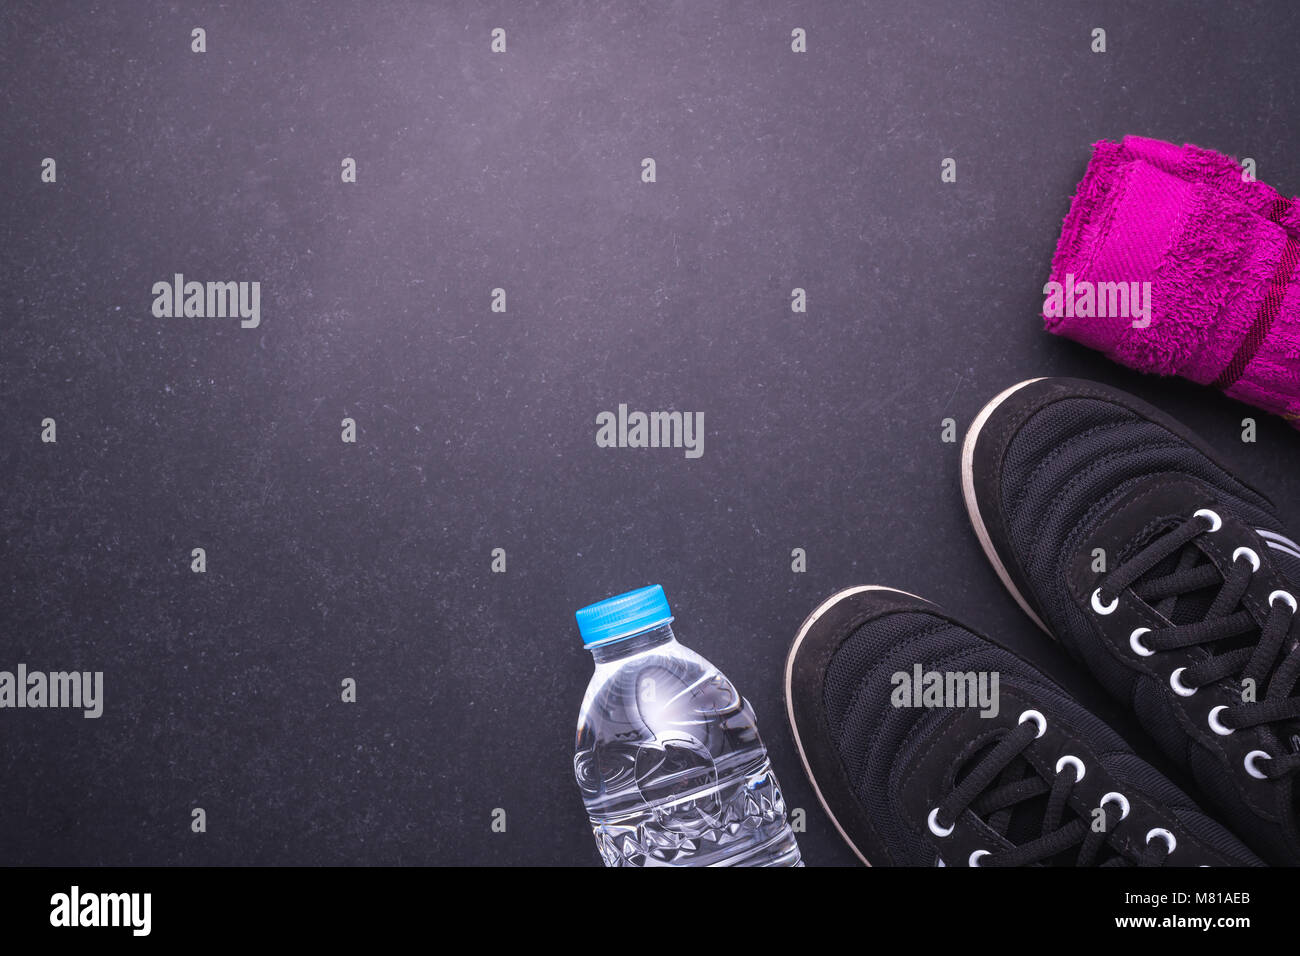 Black Running / Sneaker shoe, water bottle and towel on black stone floor. Exercise concept. Top view Stock Photo